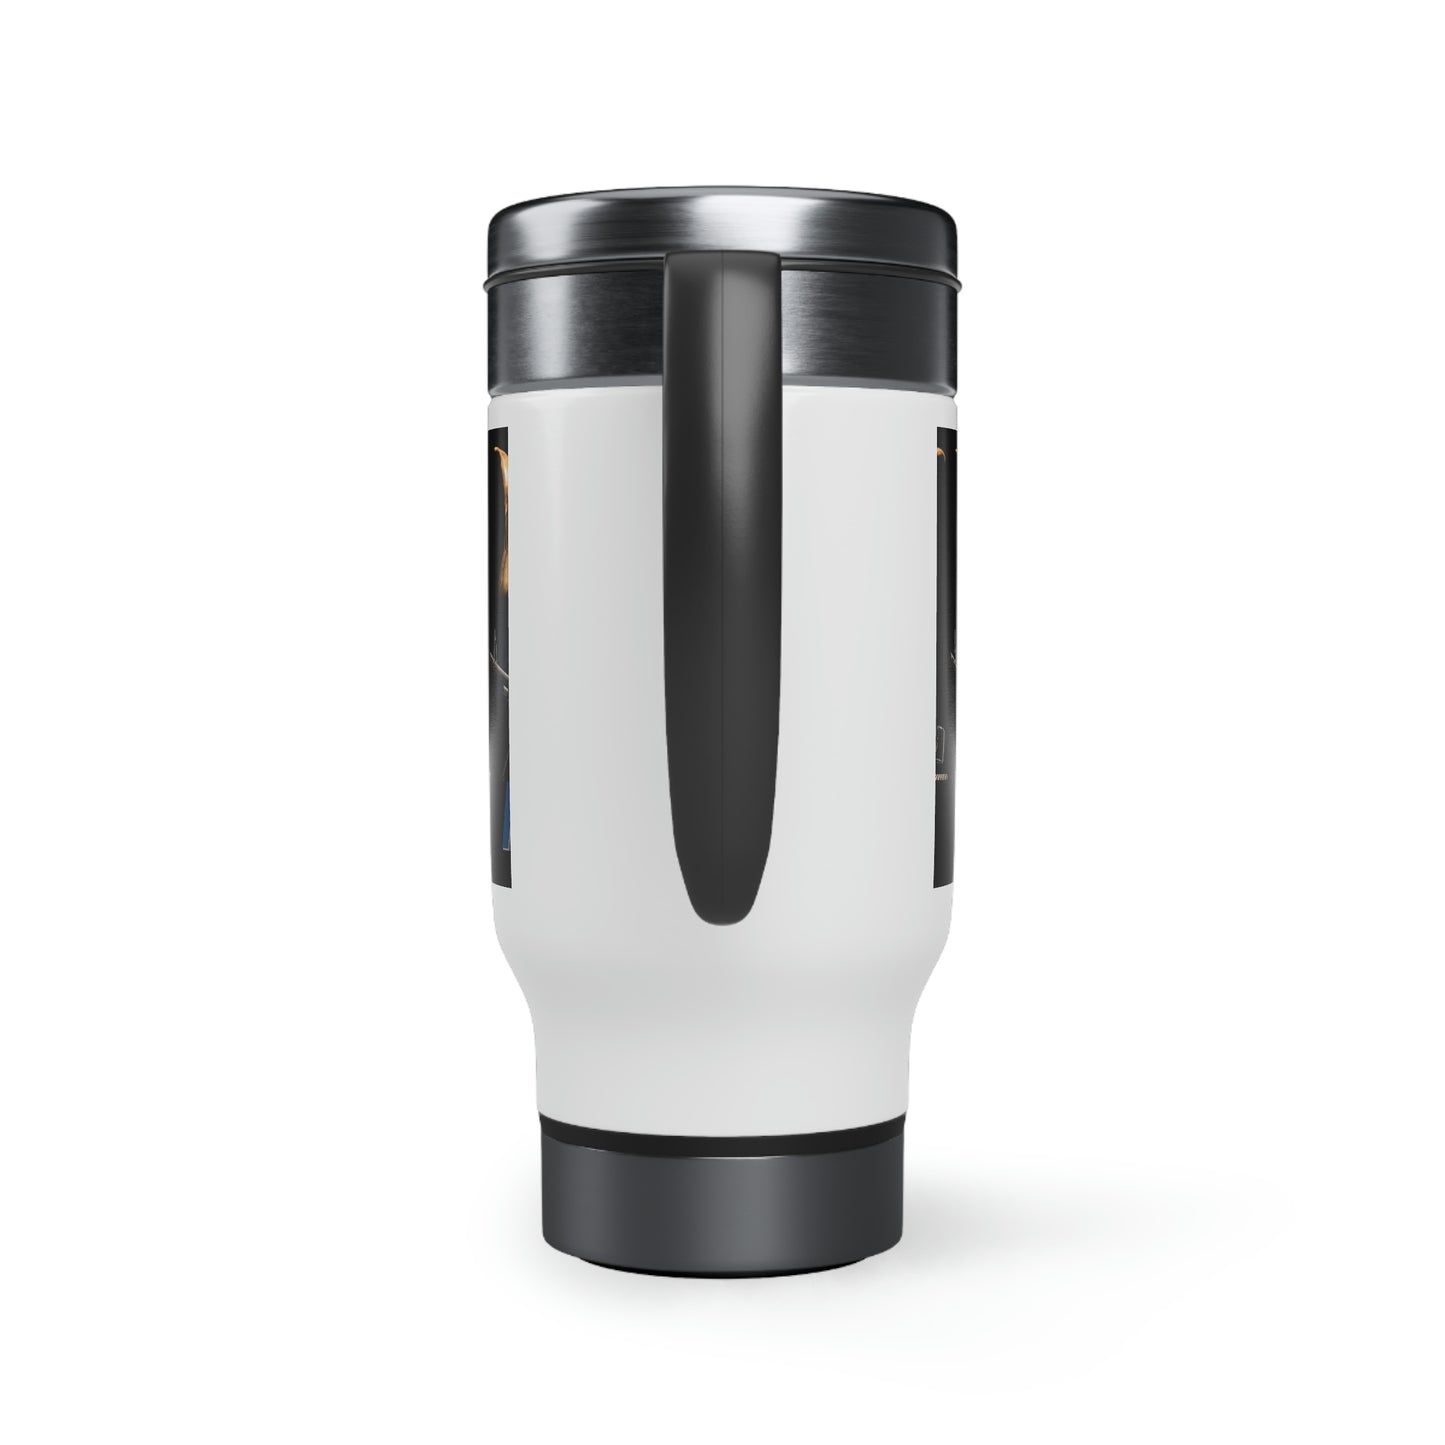 M-60 The Pig Stainless Steel Travel Mug with Handle, 14oz